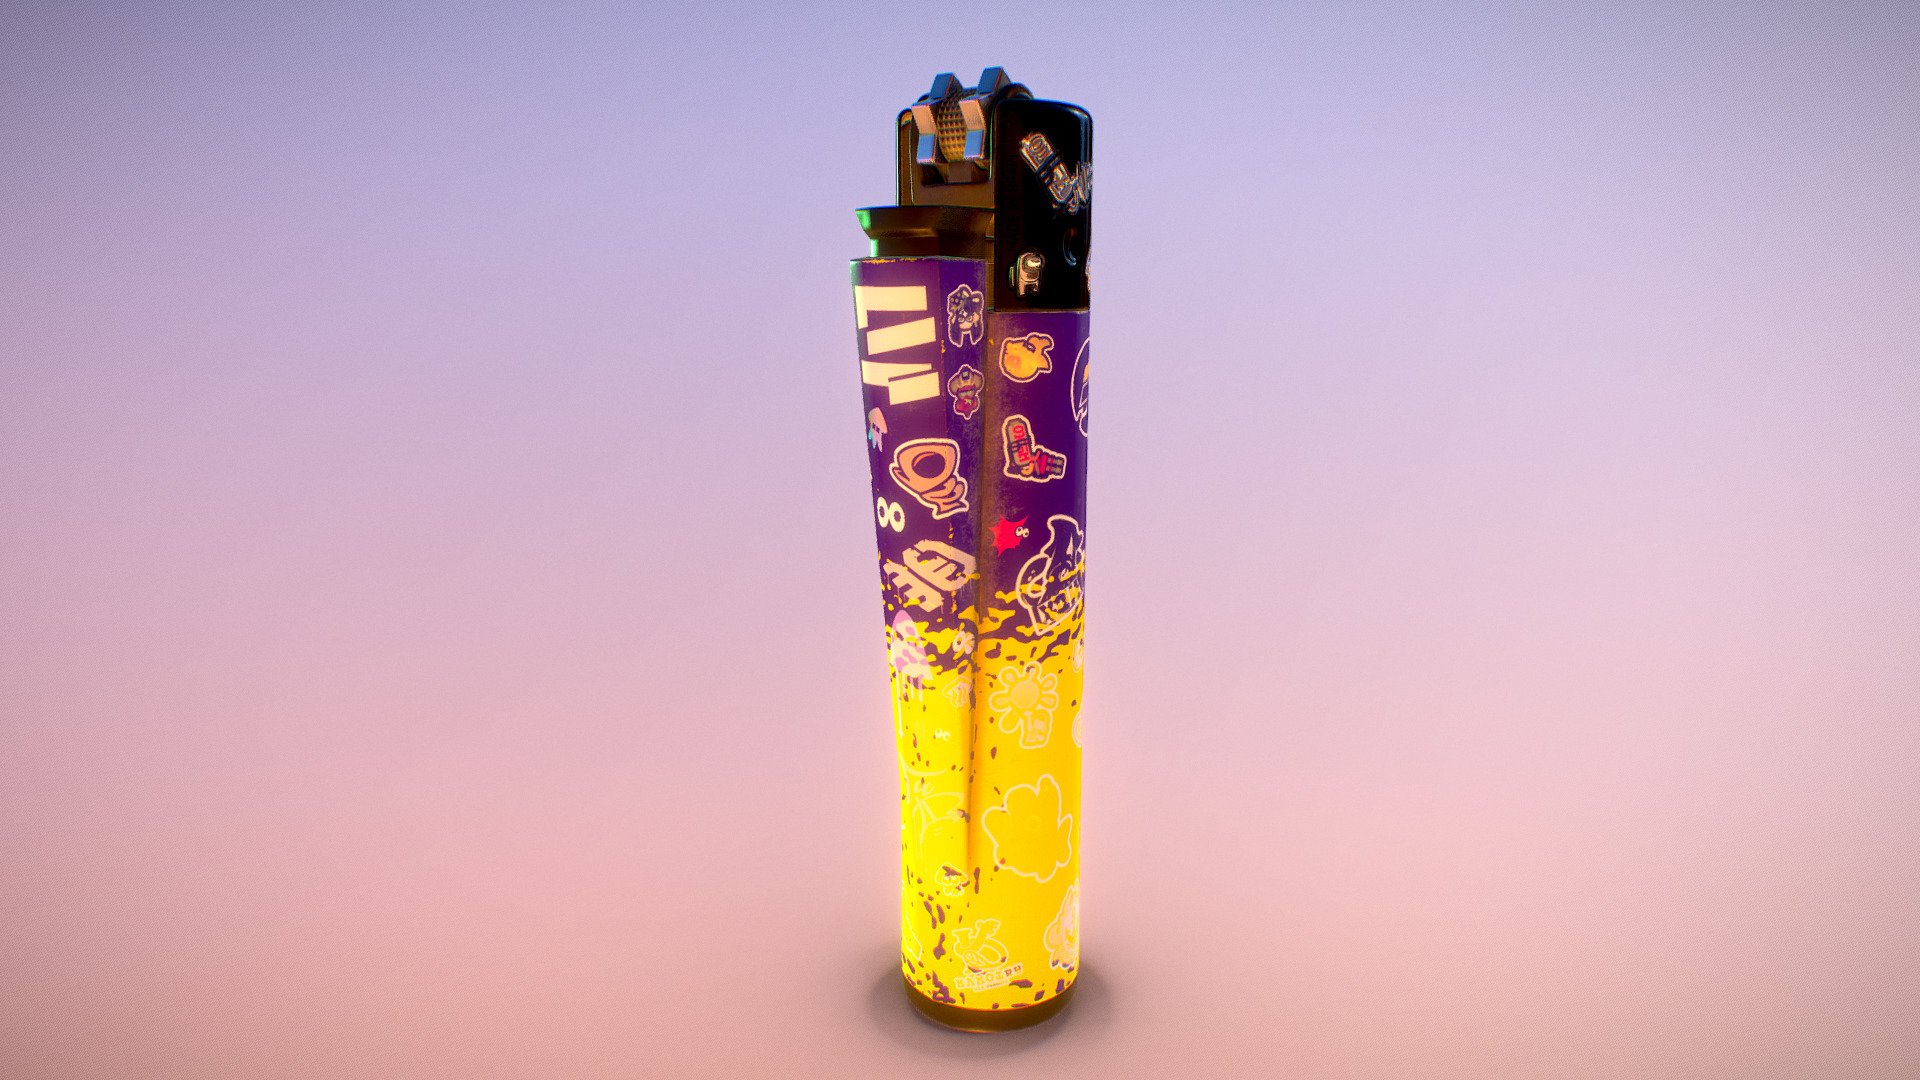 I wanted to make a lighter with the aesthetics of Splatoon 3, with the representative colors of the game and characteristic details such as the badges. Focused for specially on Hydra Splatling lovers c: . It also comes with some SUS ඞ reference.

https://www.artstation.com/artwork/lRgw4J - Lighter Splatoon 3 Edition - Download Free 3D model by XxChrisxX0_Spl 3d model